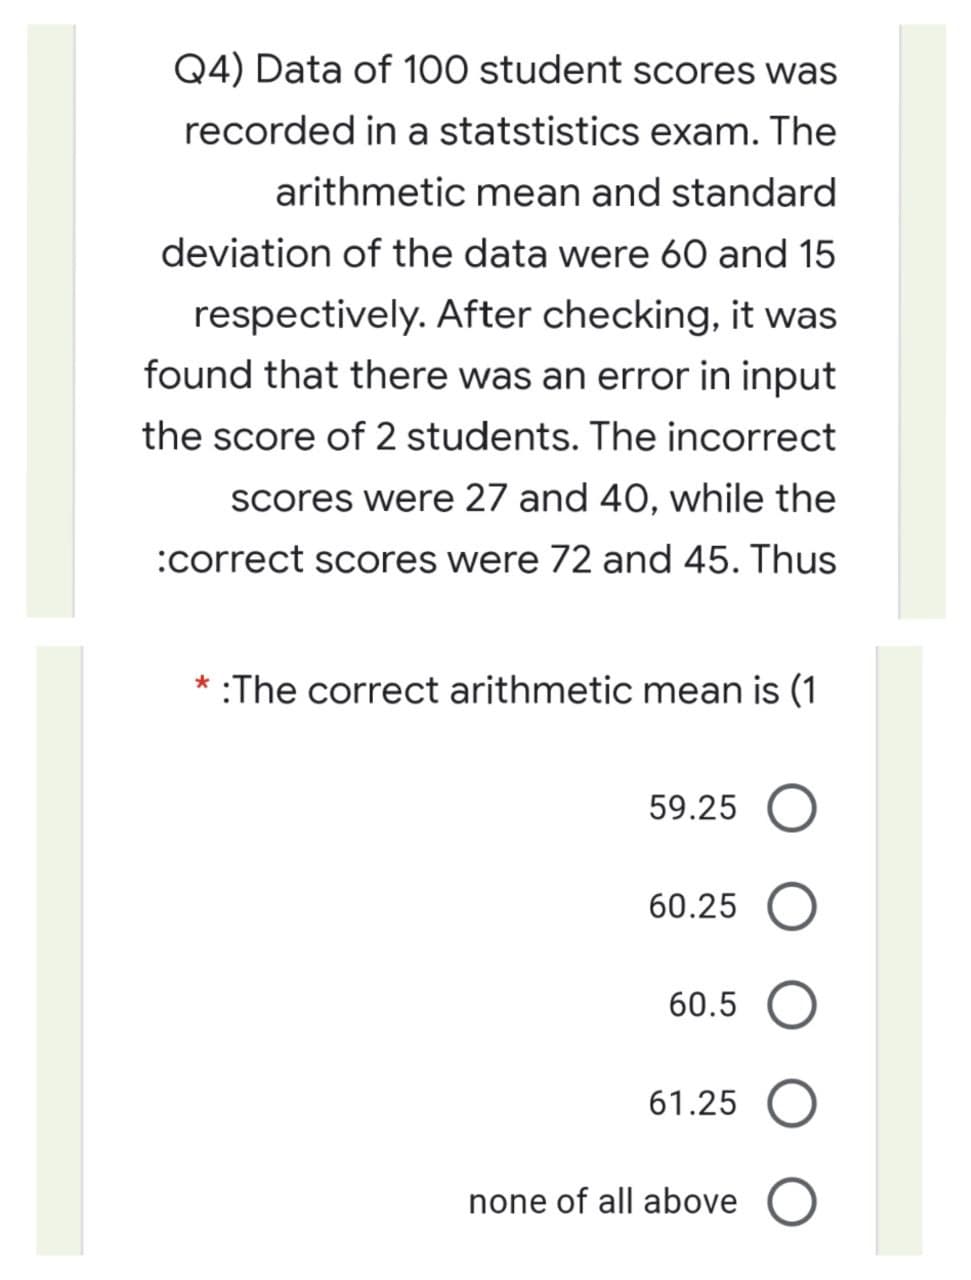 Q4) Data of 100 student scores was
recorded in a statstistics exam. The
arithmetic mean and standard
deviation of the data were 60 and 15
respectively. After checking, it was
found that there was an error in input
the score of 2 students. The incorrect
scores were 27 and 40, while the
:correct scores were 72 and 45. Thus
* :The correct arithmetic mean is (1
59.25 O
60.25
60.5
61.25 O
none of all above O